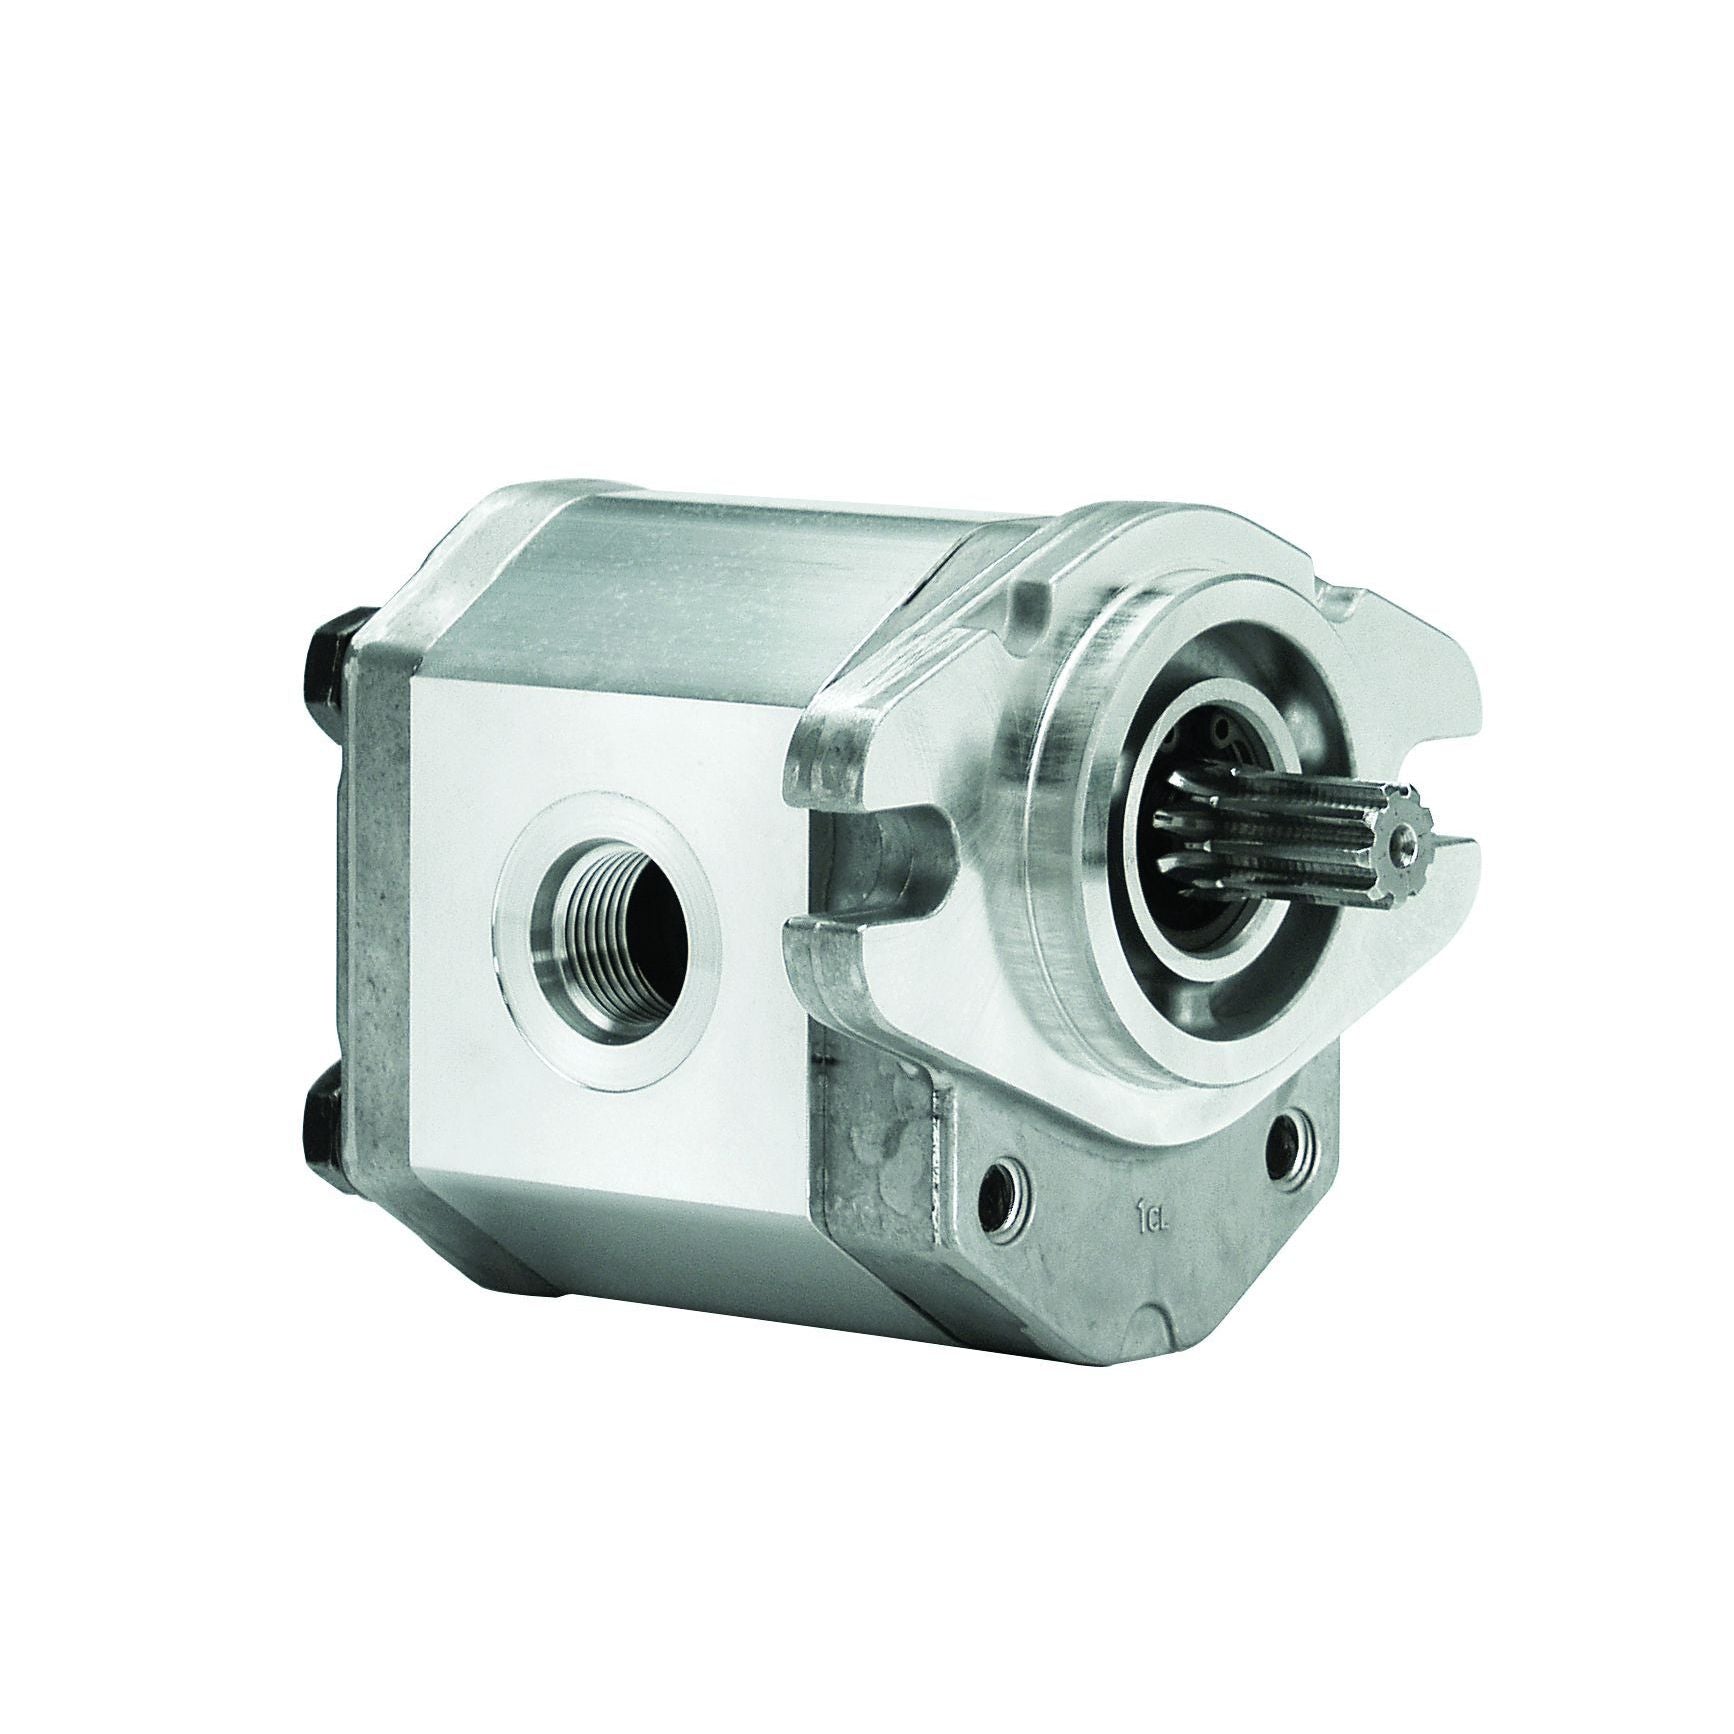 ALP1A-D-2-S1 : Marzocchi Gear Pump, CW, 1.4cc (0.0854in3), 0.67 GPM, 3625psi, 6000 RPM, #8 SAE (1/2") In, #6 SAE (3/8") Out, Splined Shaft 9T 20/40DP, SAE AA 2-Bolt Mount